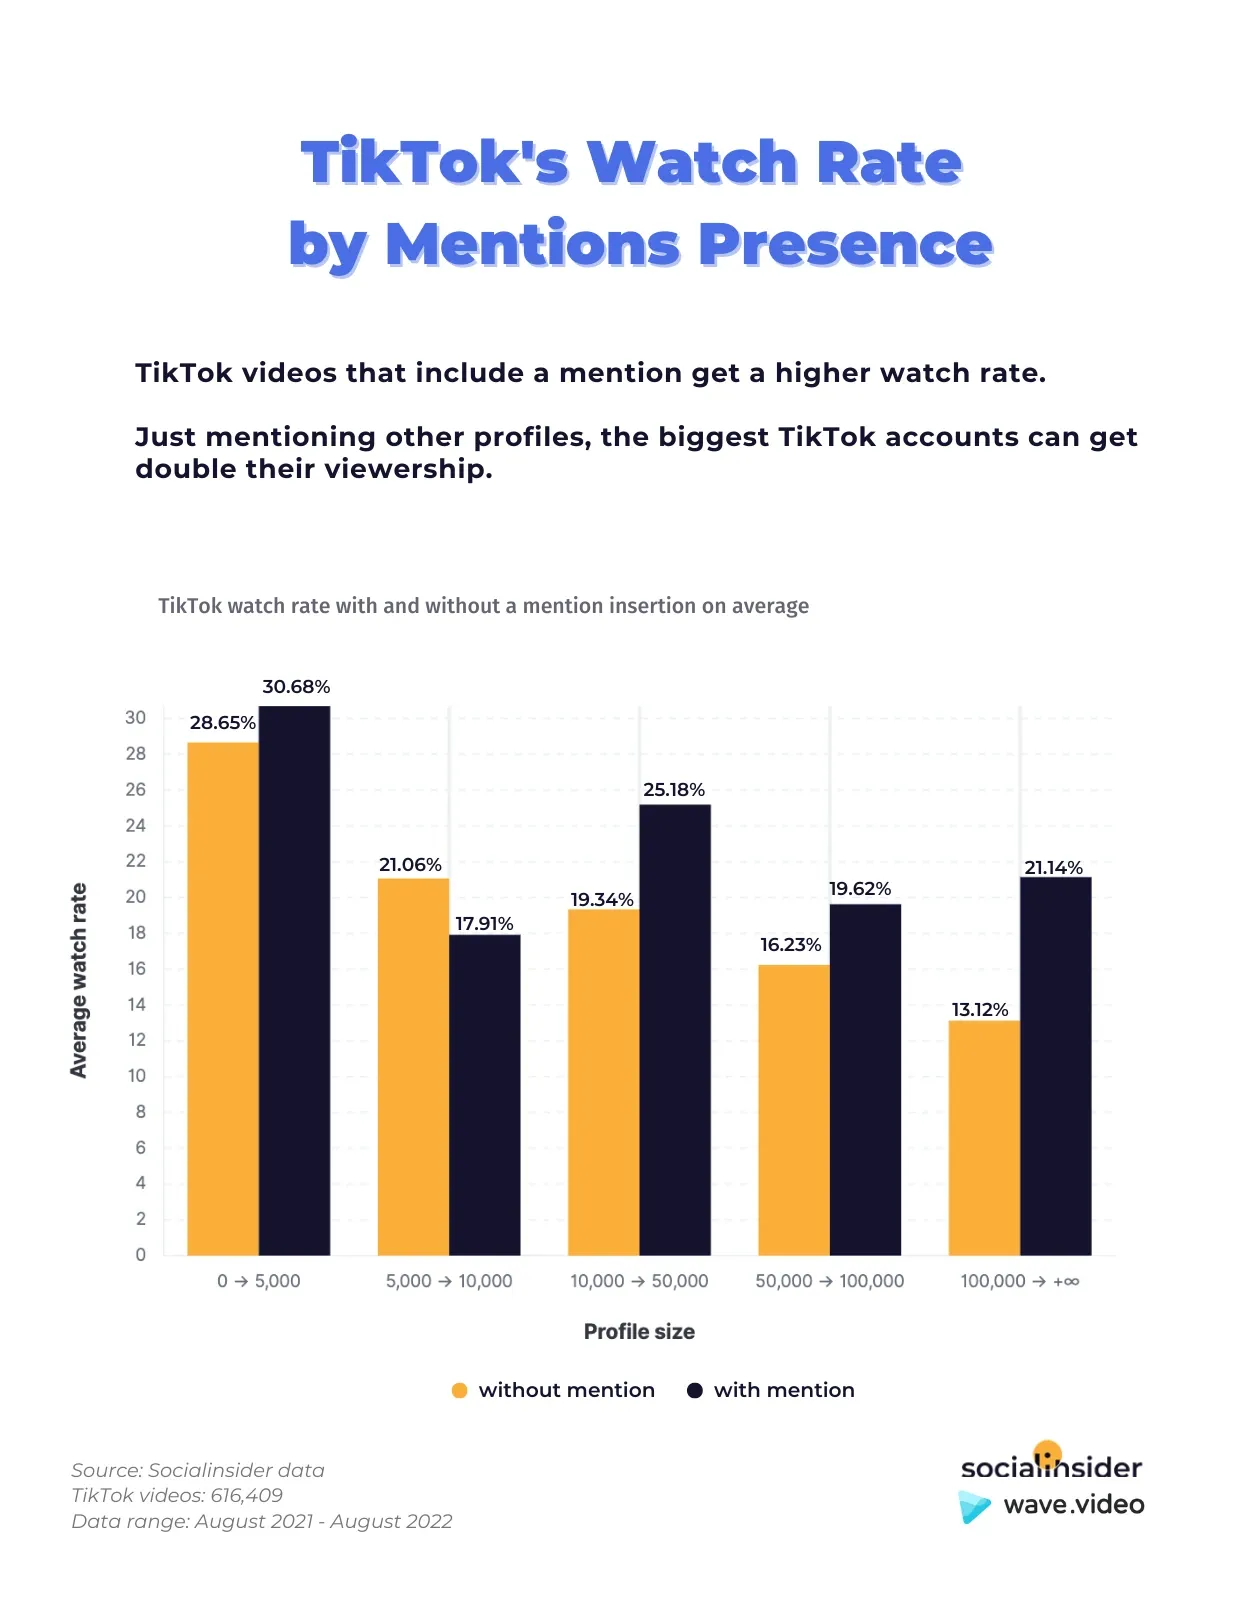 TikTok watch rate by mentions presence